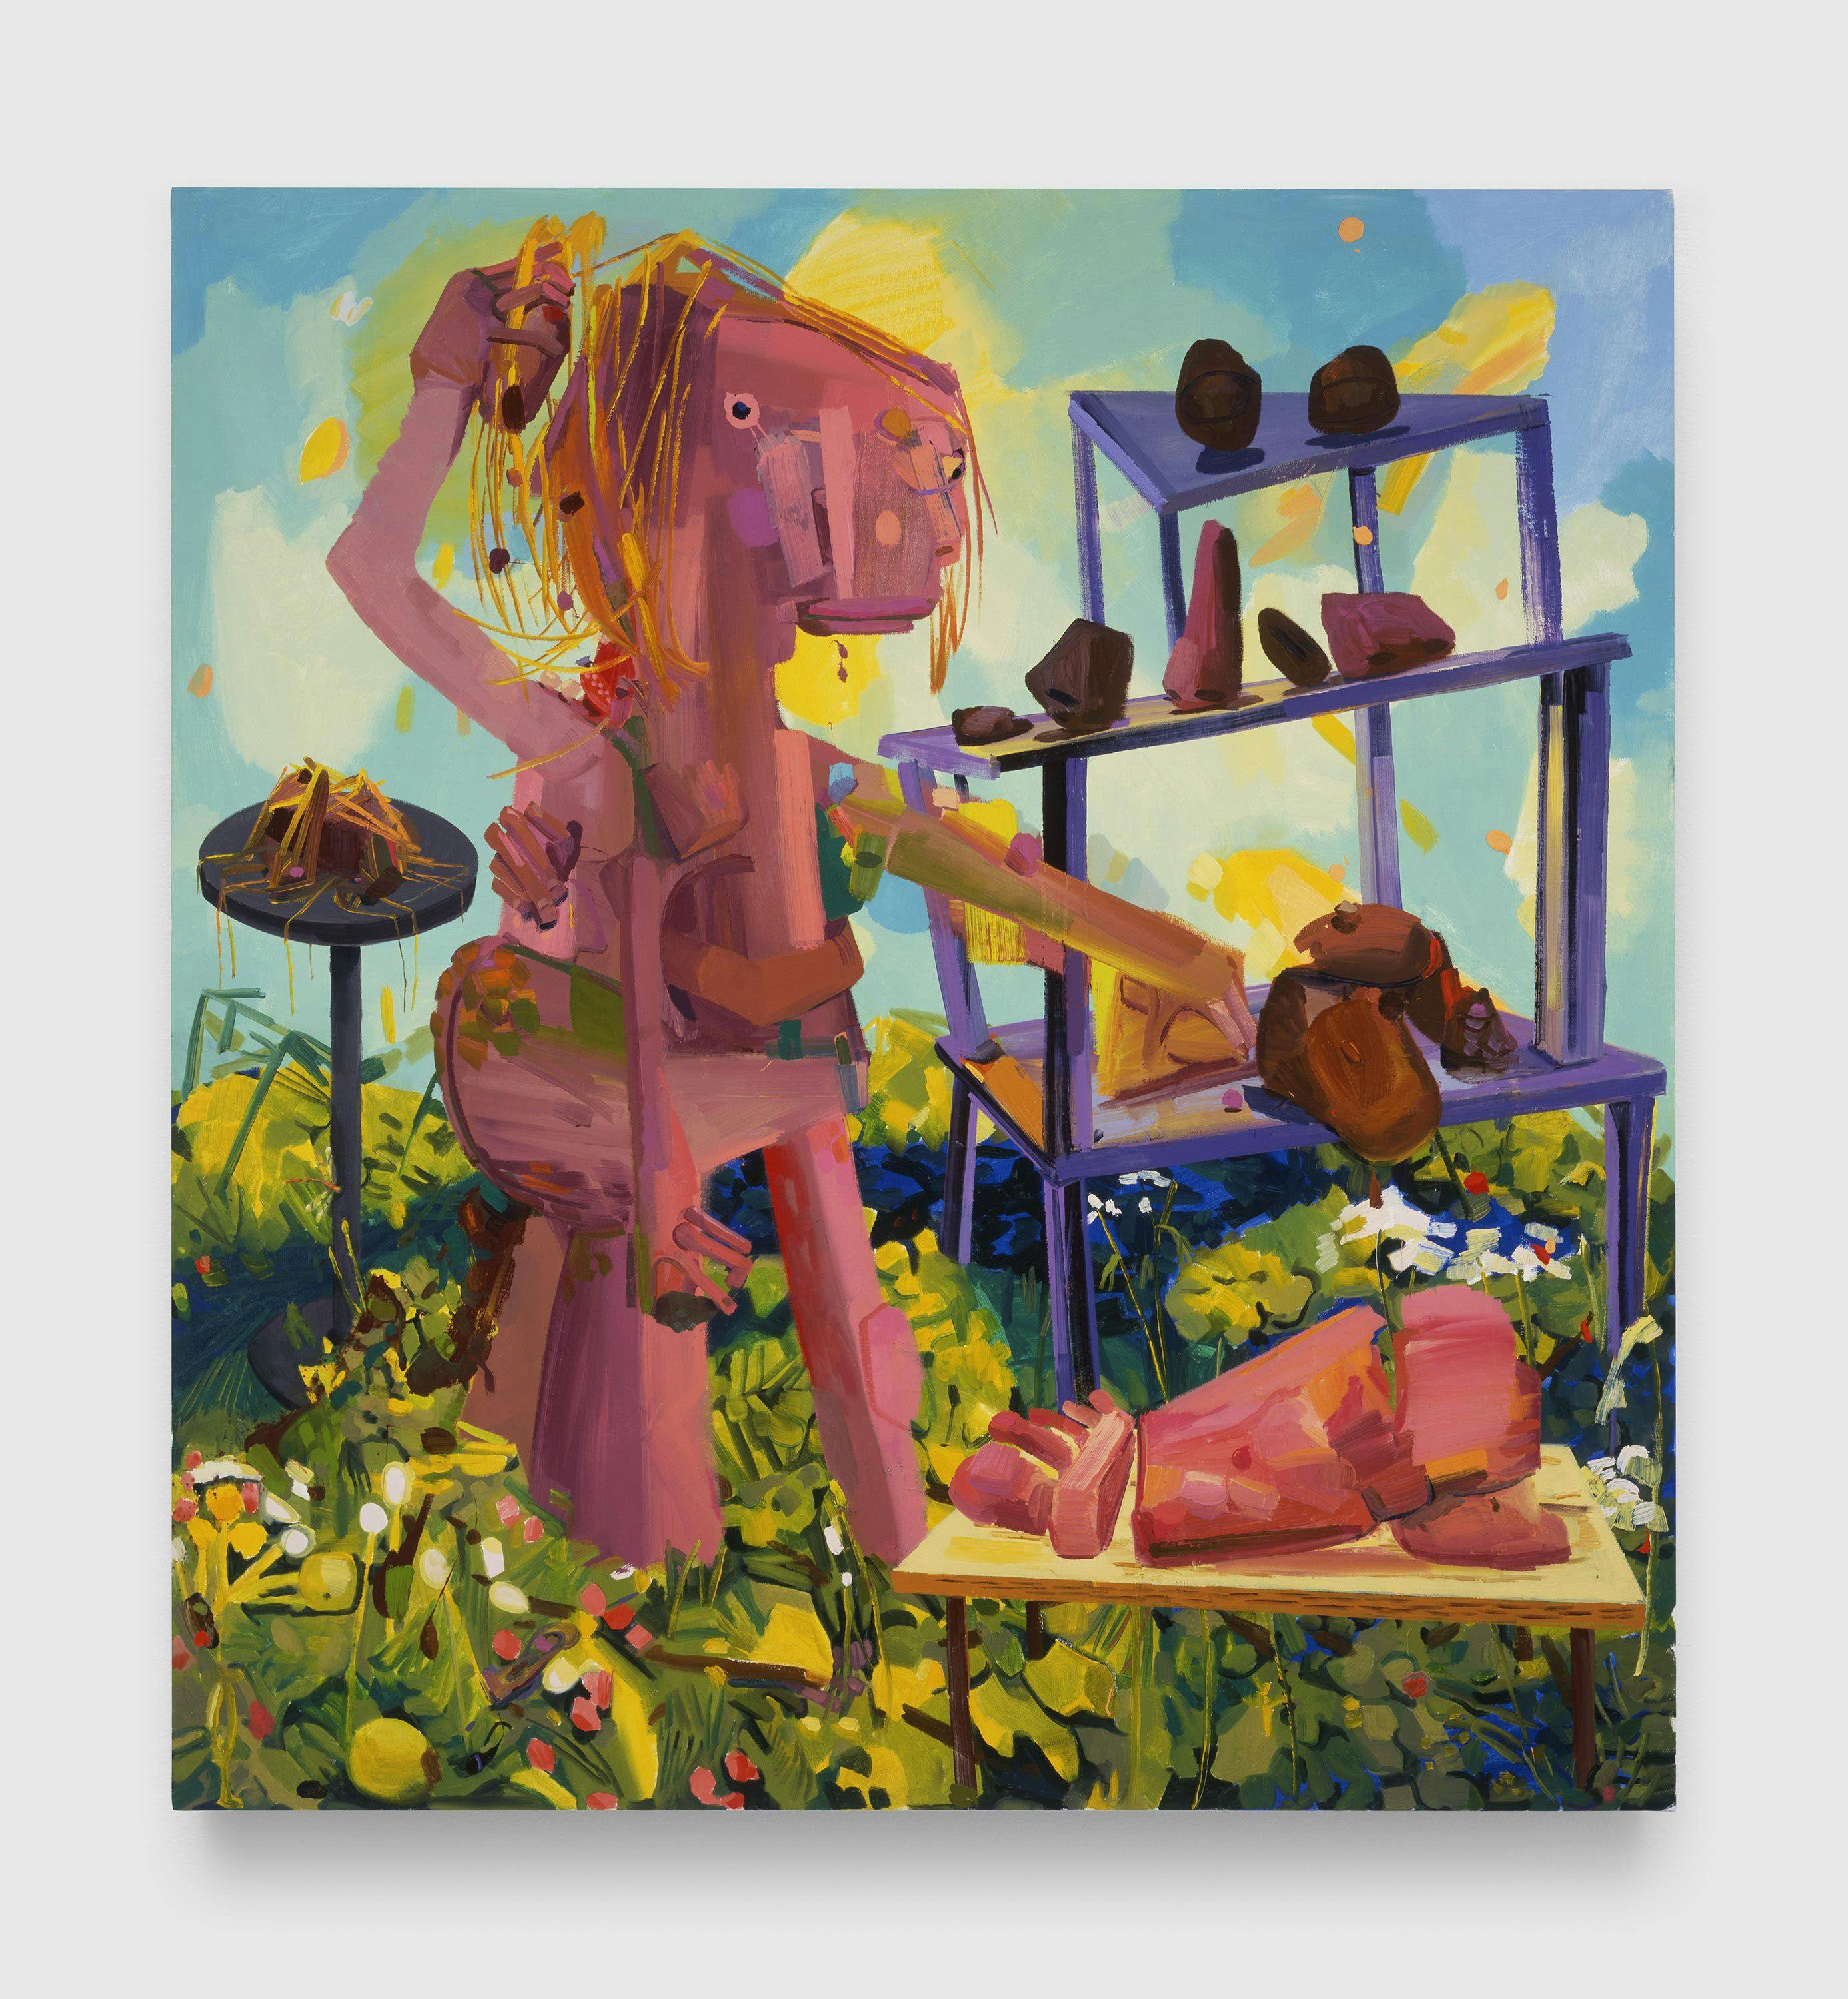 A painting by Dana Schutz, titled Twin Parts, dated 2004.